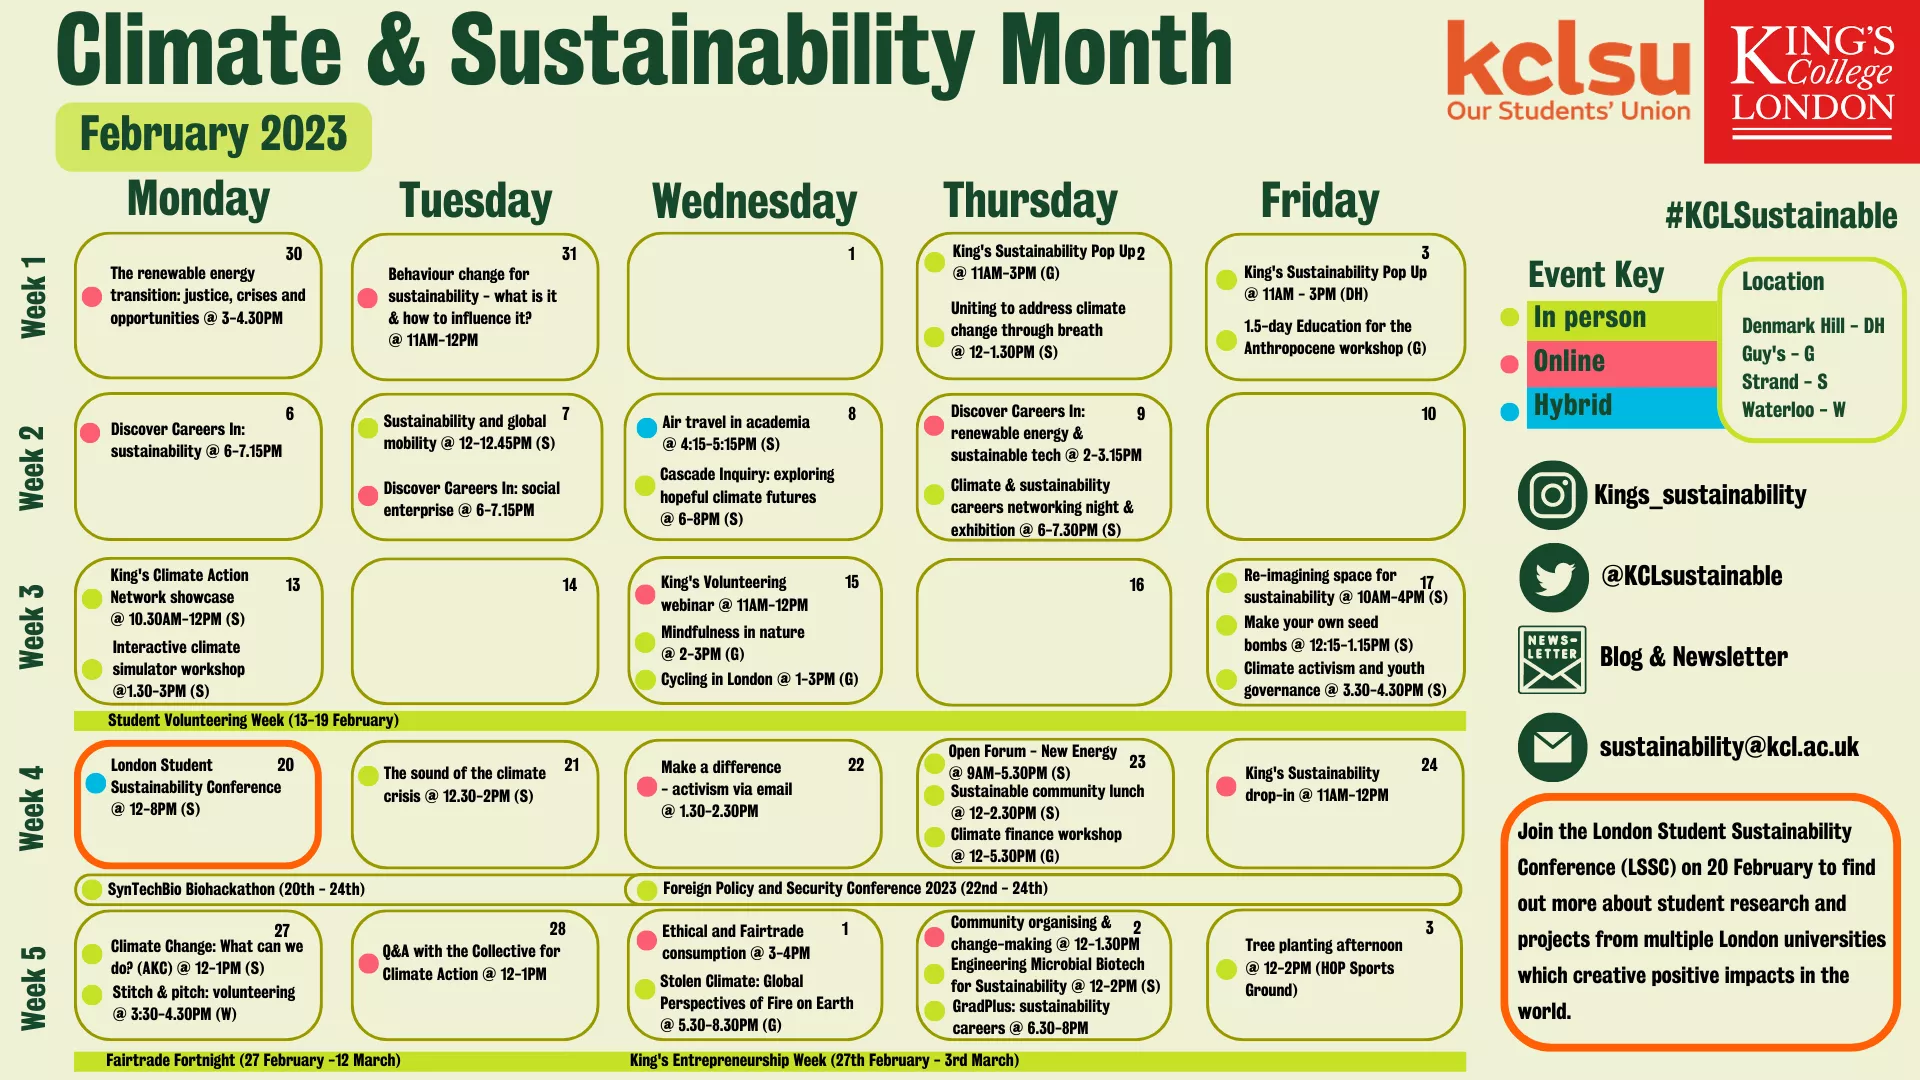 Climate & Sustainability Month Calendar (updated 17.2.23)